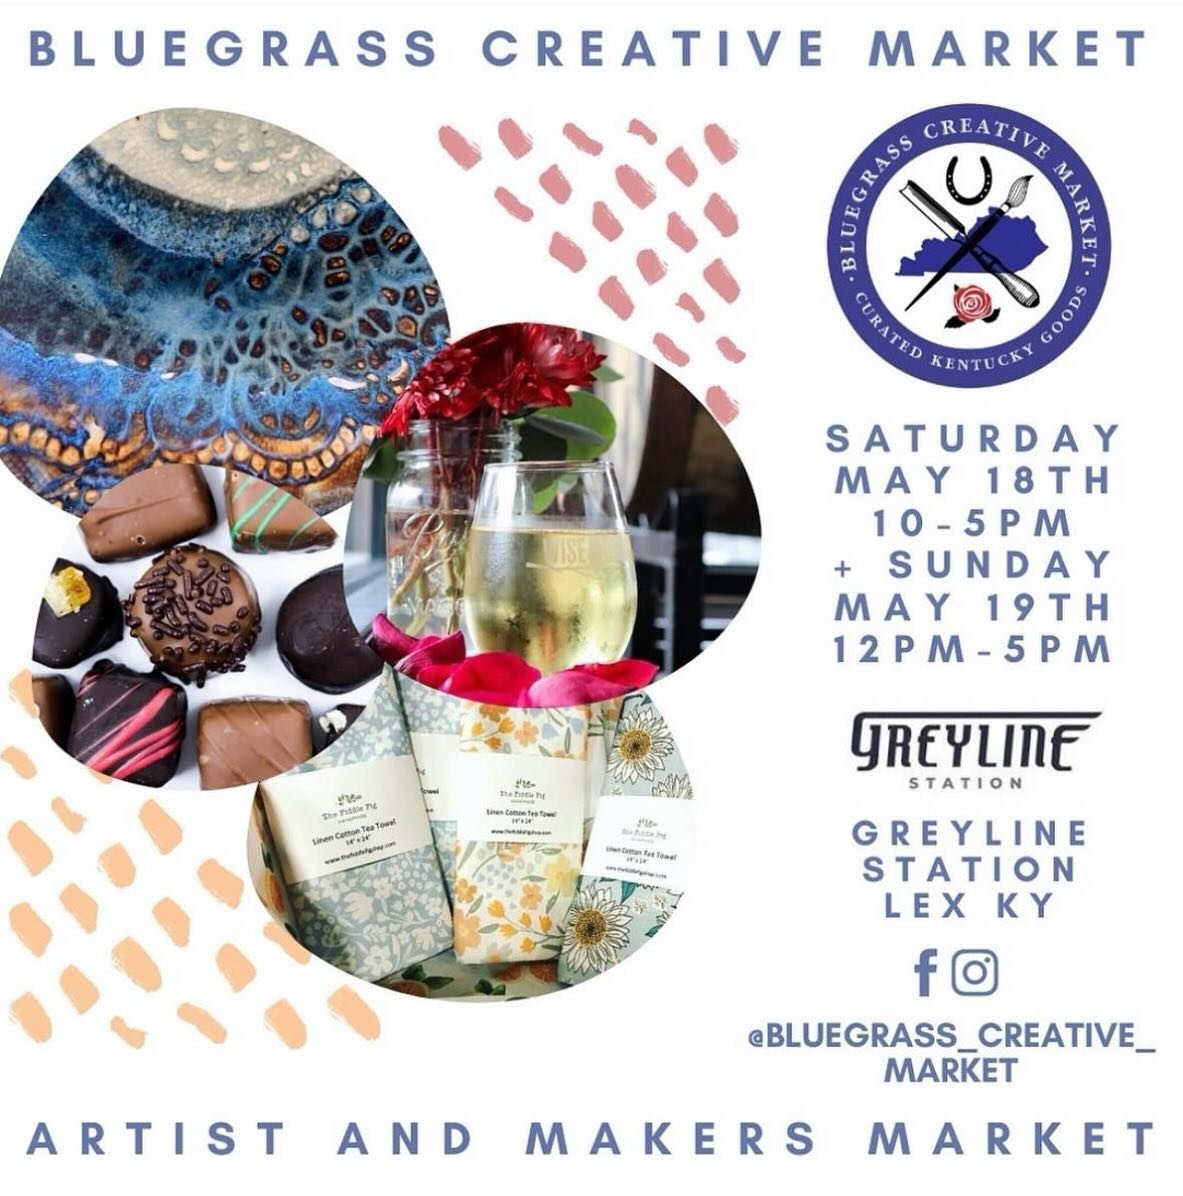 This weekend at Greyline Station! Come out and enjoy multiple vendors at the Bluegrass Creative Market! Fun for the whole family! ☀️

#visitlex #downtownlex #downtownlexington #downtownlexingtonky #downtownlexpartnership #thingstodoinlexingtonky #the